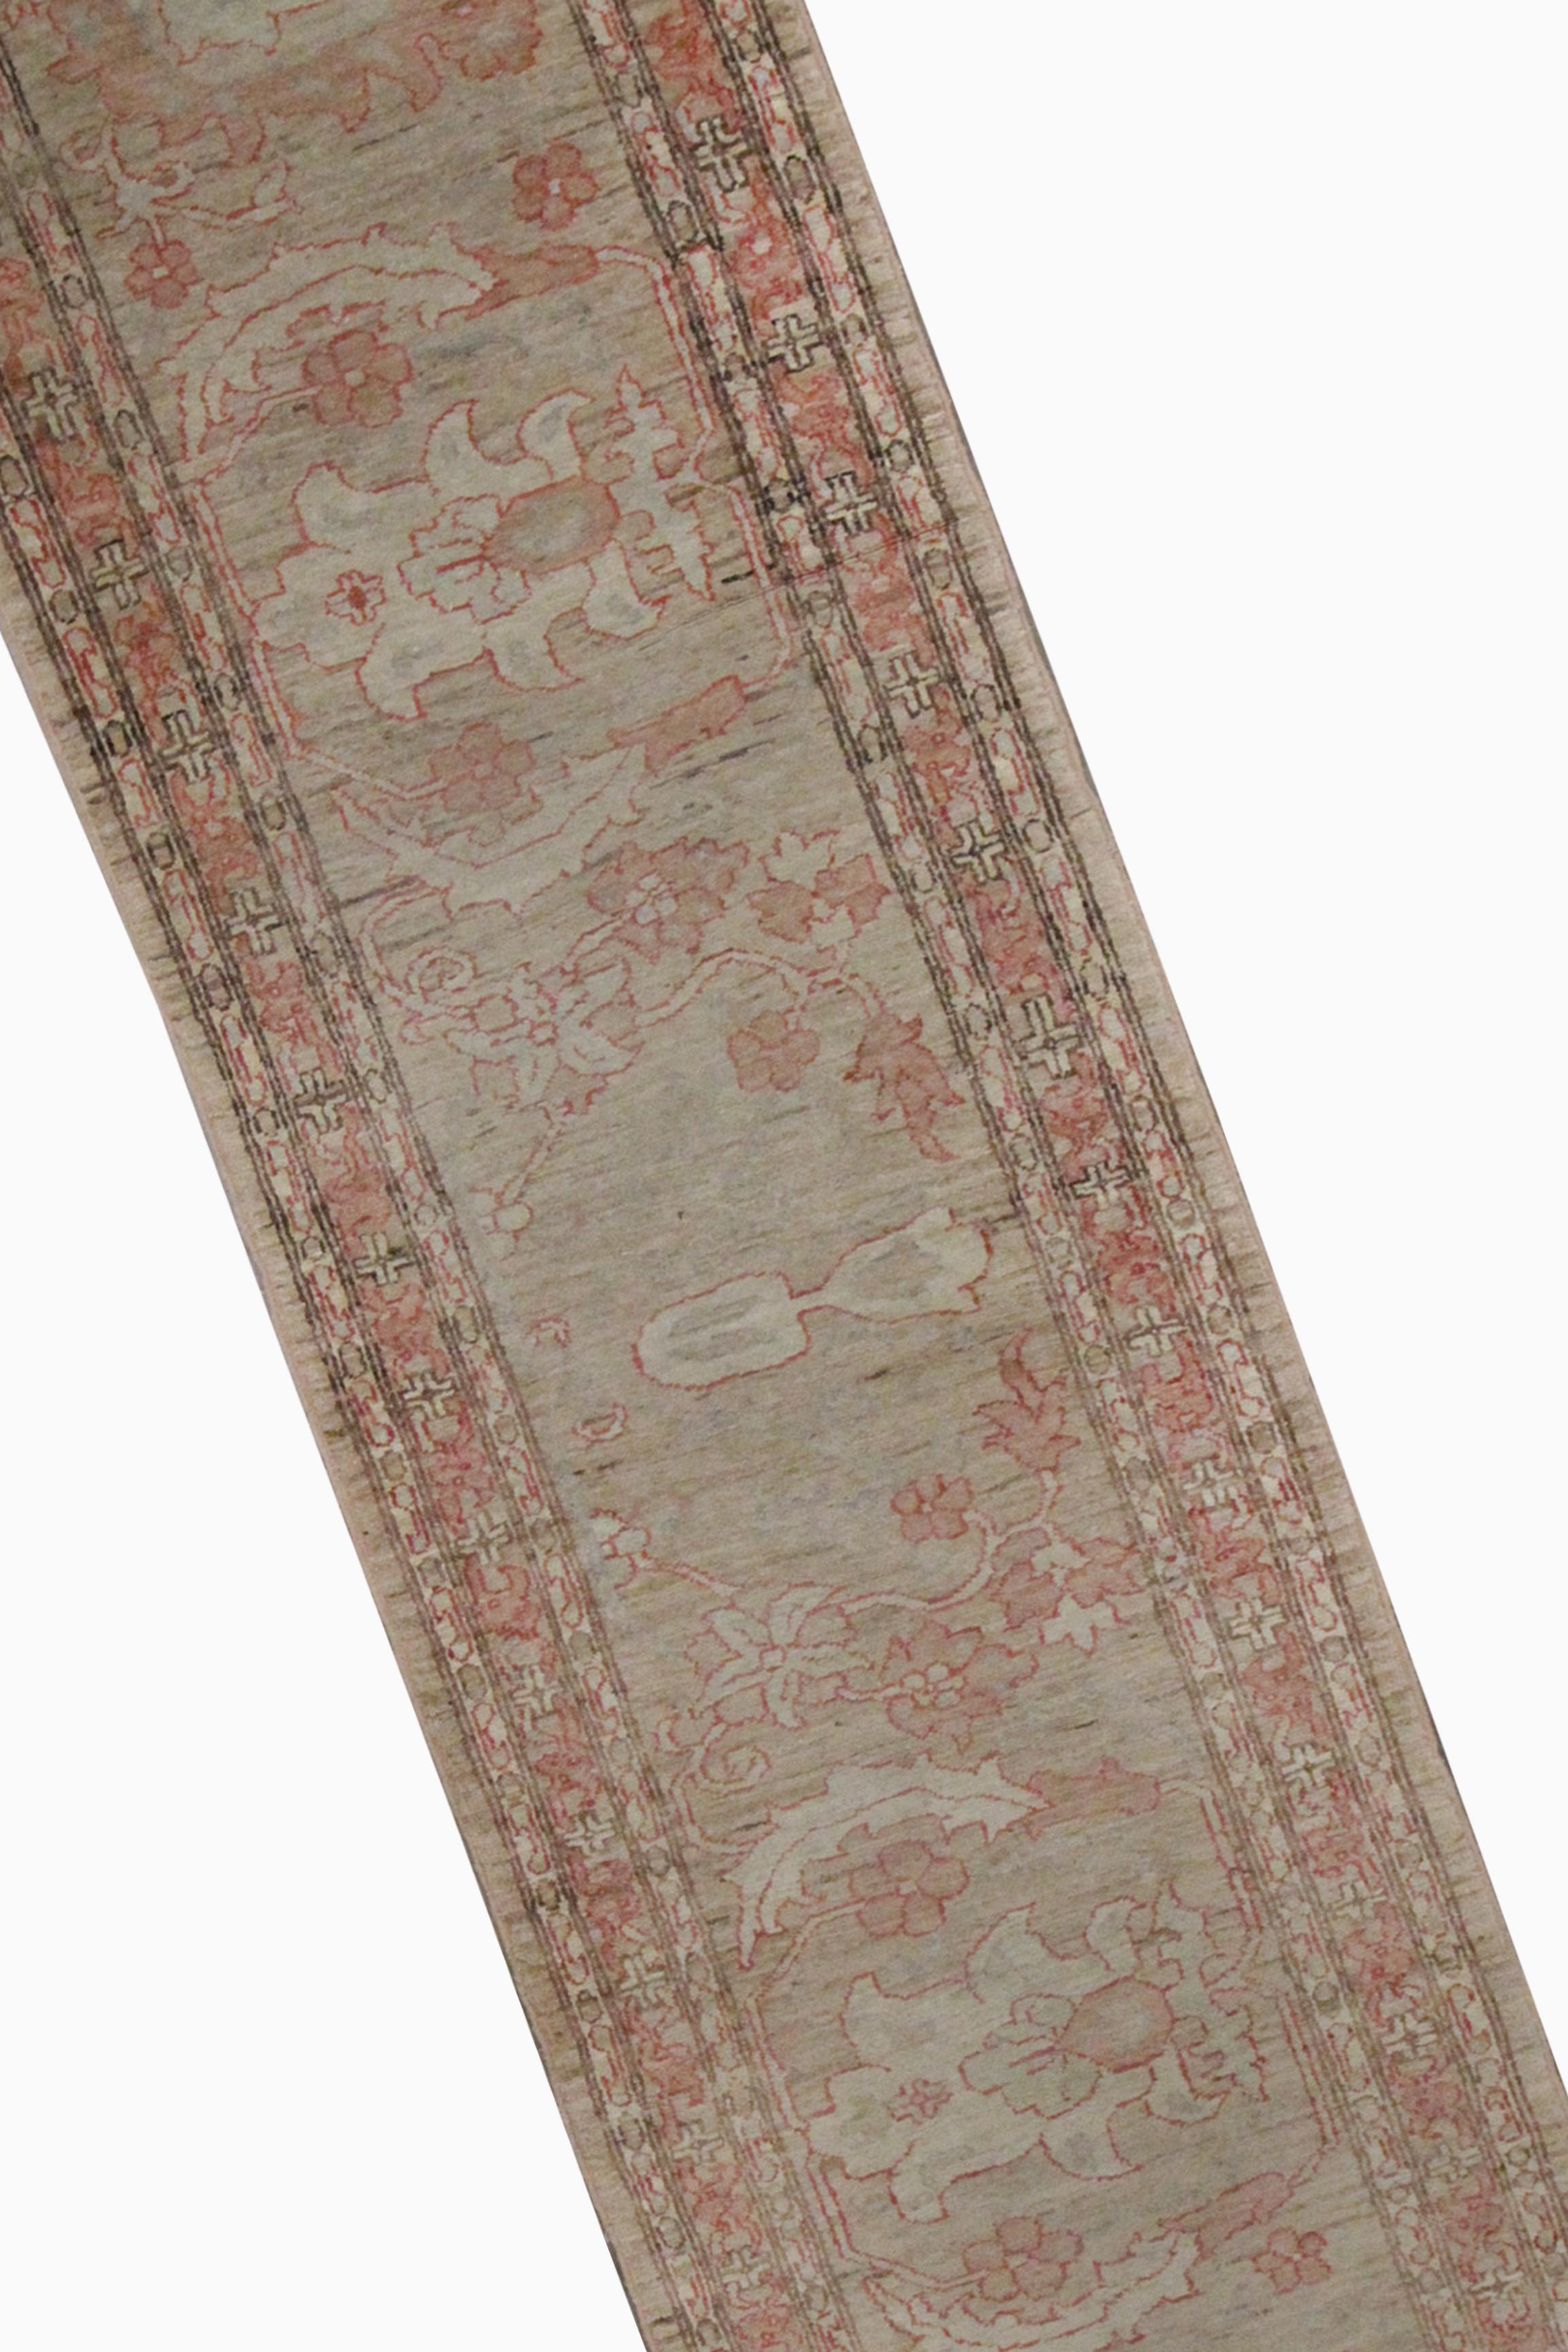 This beige runner rug is an excellent example of carpets woven by hand in the mid-20th century. The central design has been woven on a cream background with accents of pink that make up the decorative floral pattern. The delicate design and subtle